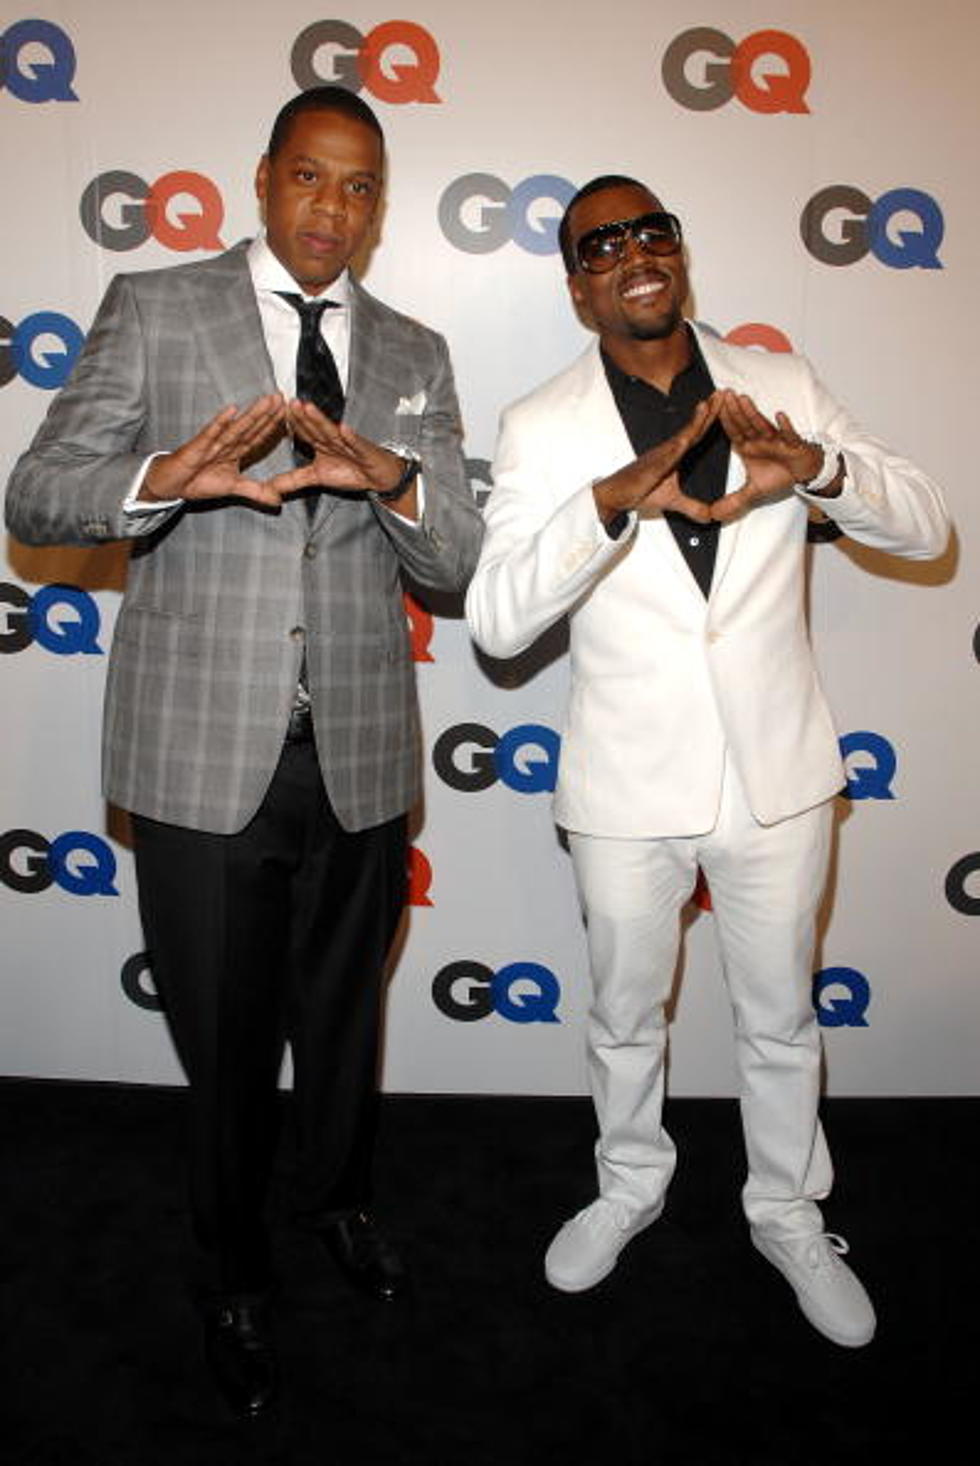 Best Sweet 16 Ever? Jay-Z and Kanye Live!